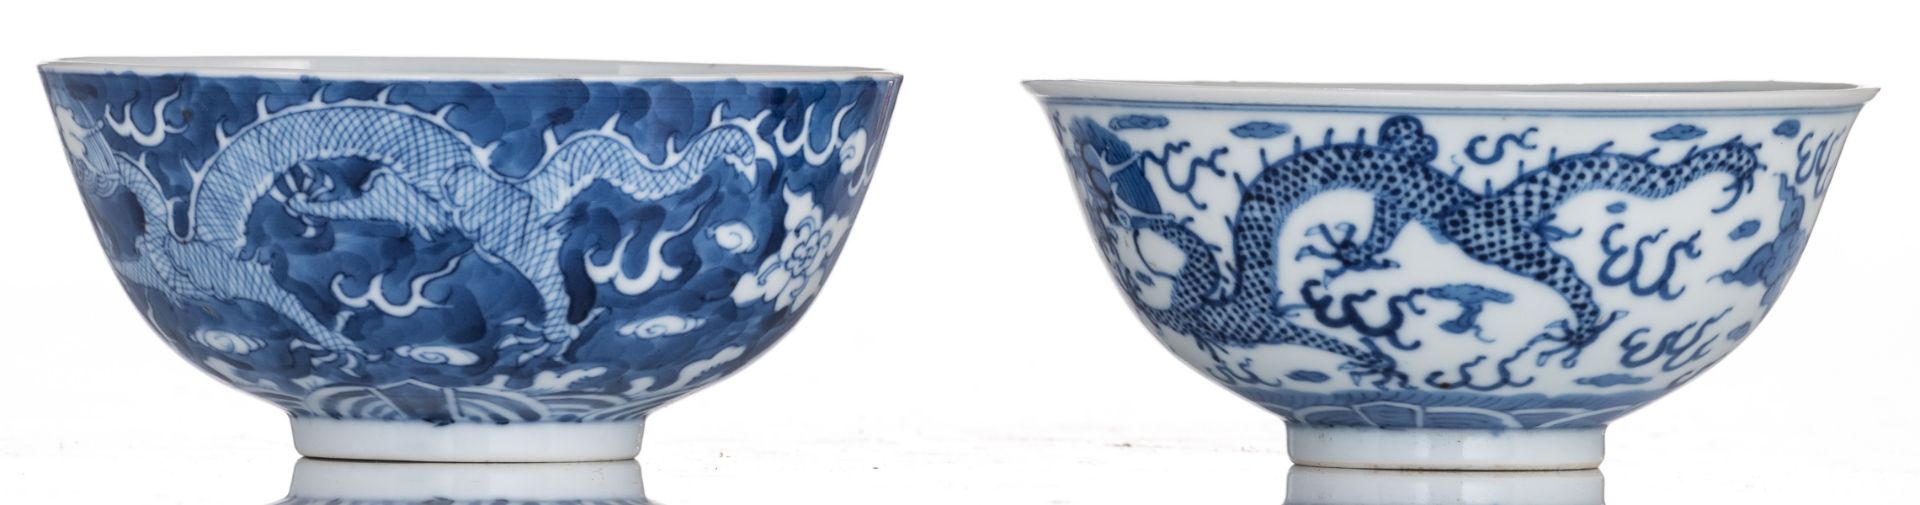 Two Chinese blue and white dragon decorated bowls, with a Kangxi mark, H 5,5 - 6 - ø 12,5 - 13 cm - Bild 3 aus 7